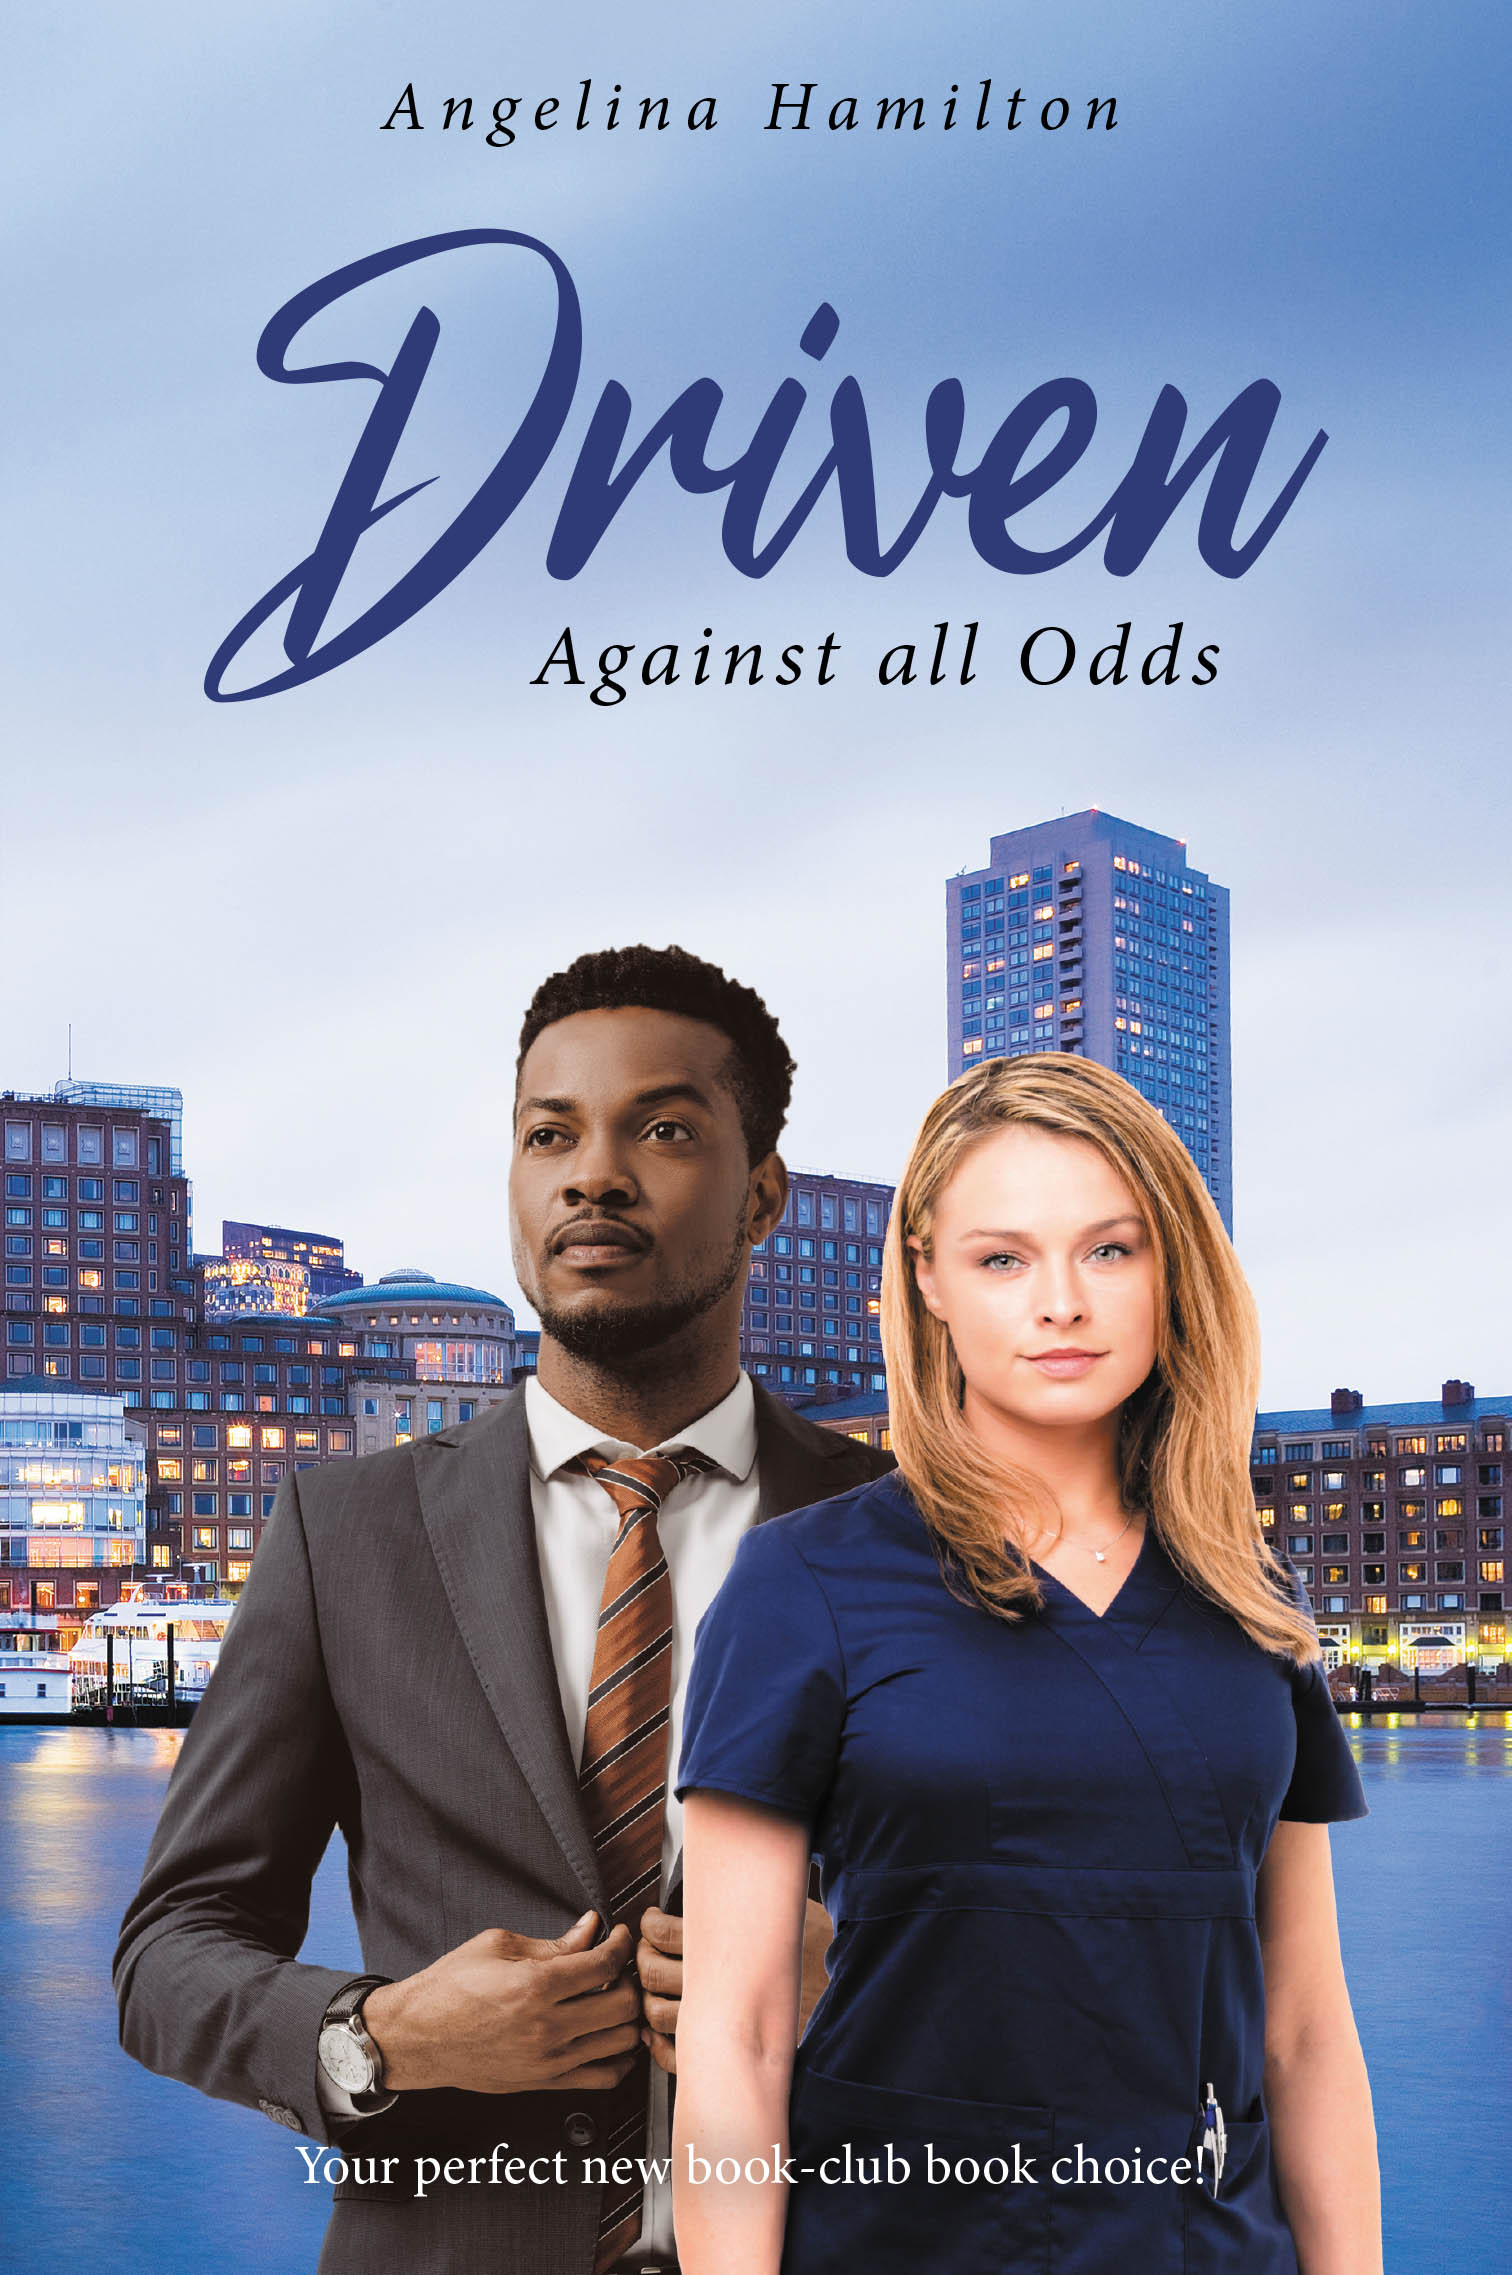 Author Angelina Hamilton’s New Book, "Driven: Against All Odds," is a Fascinating Story of a Young Nurse Who Manages to Find Love After Losing Her Memory